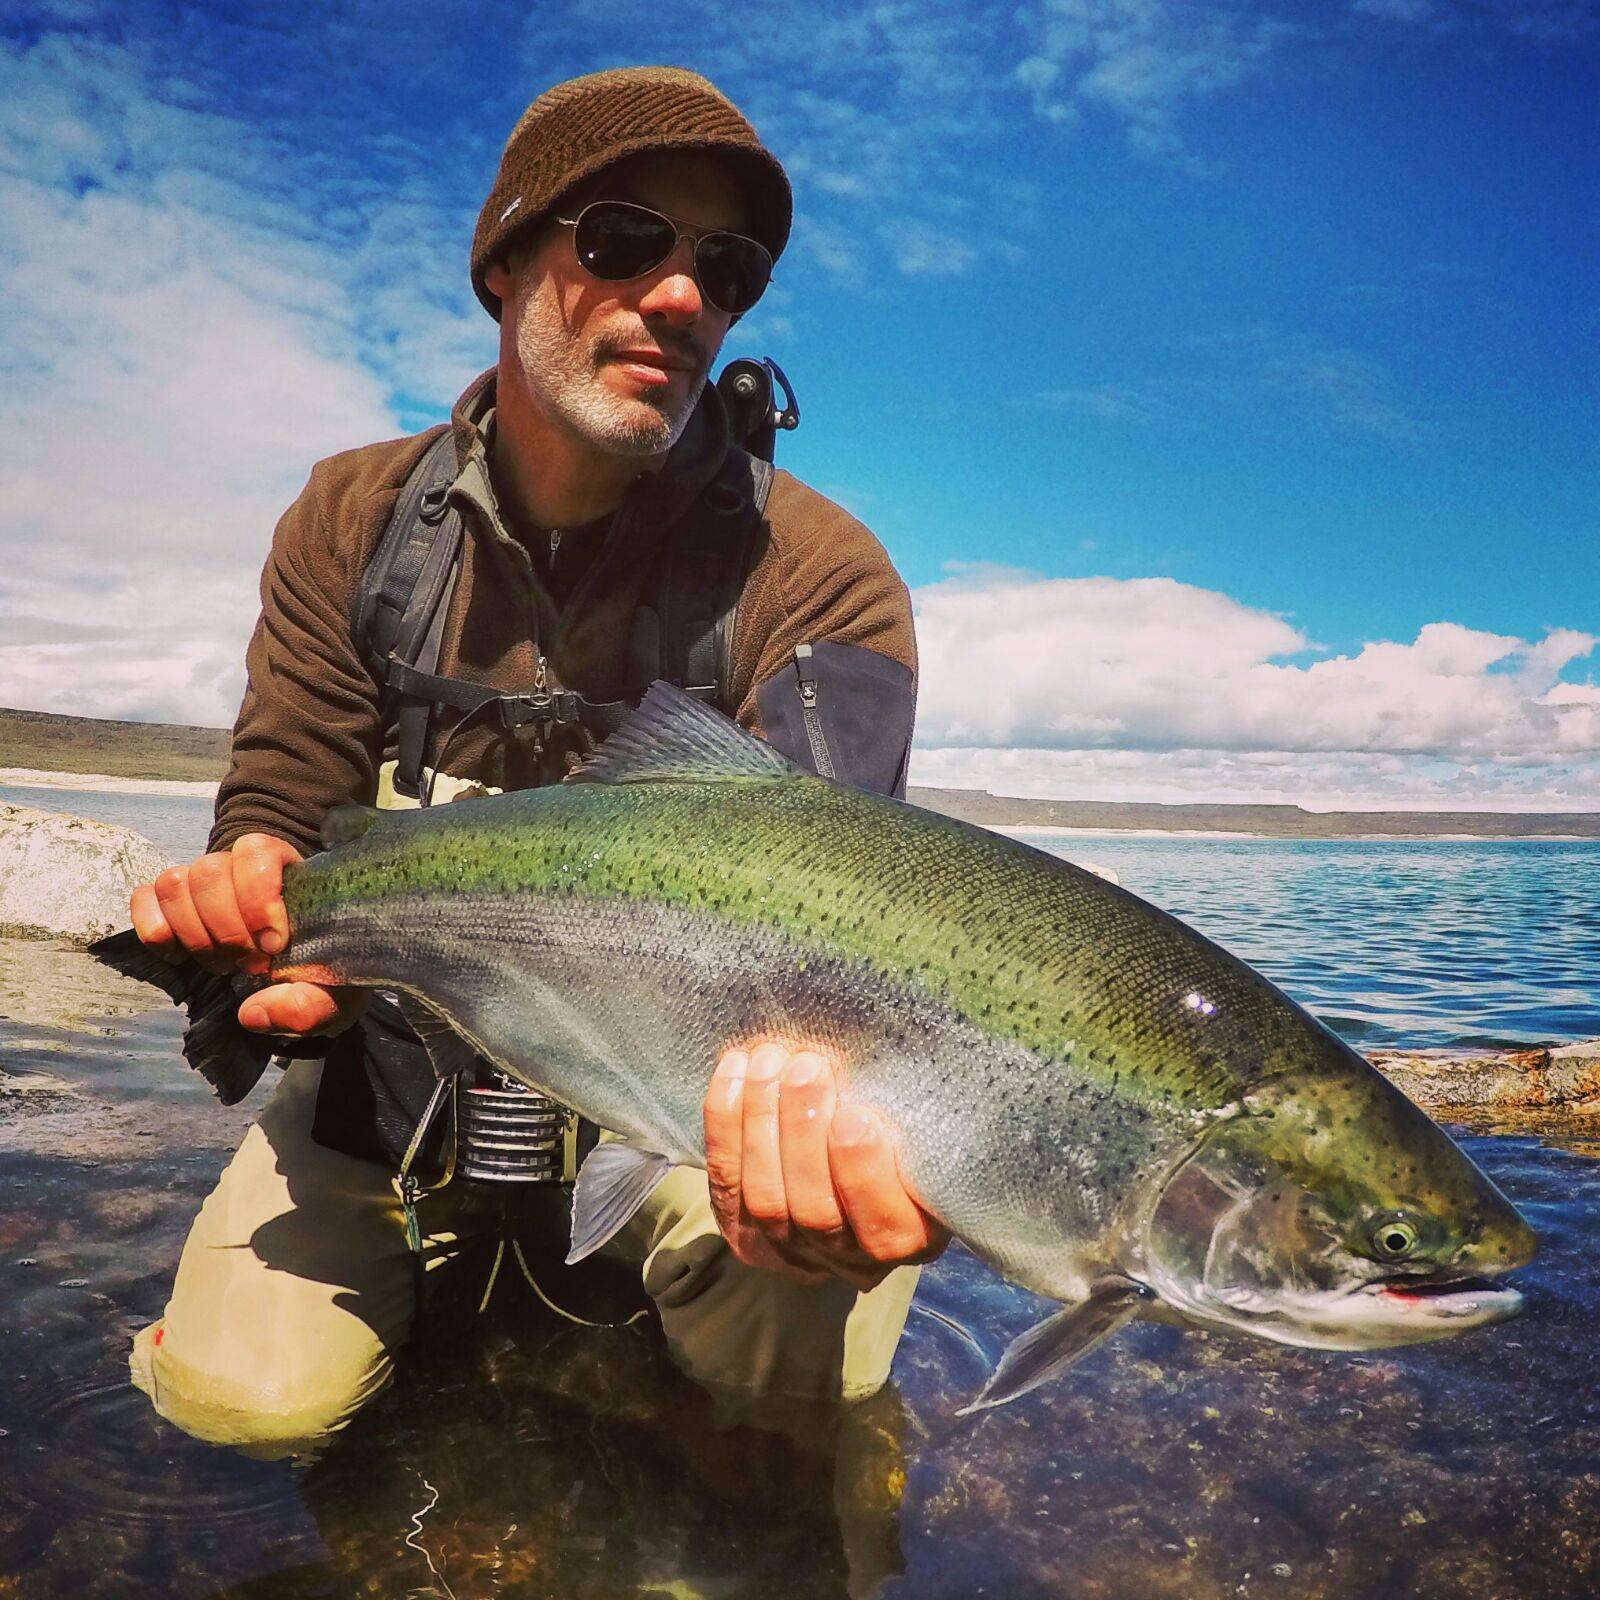 Puesto bay, sightfishing at its best, casting big dries and slow striping scuds just below the surface! Fly fishing Argentina at it's best.